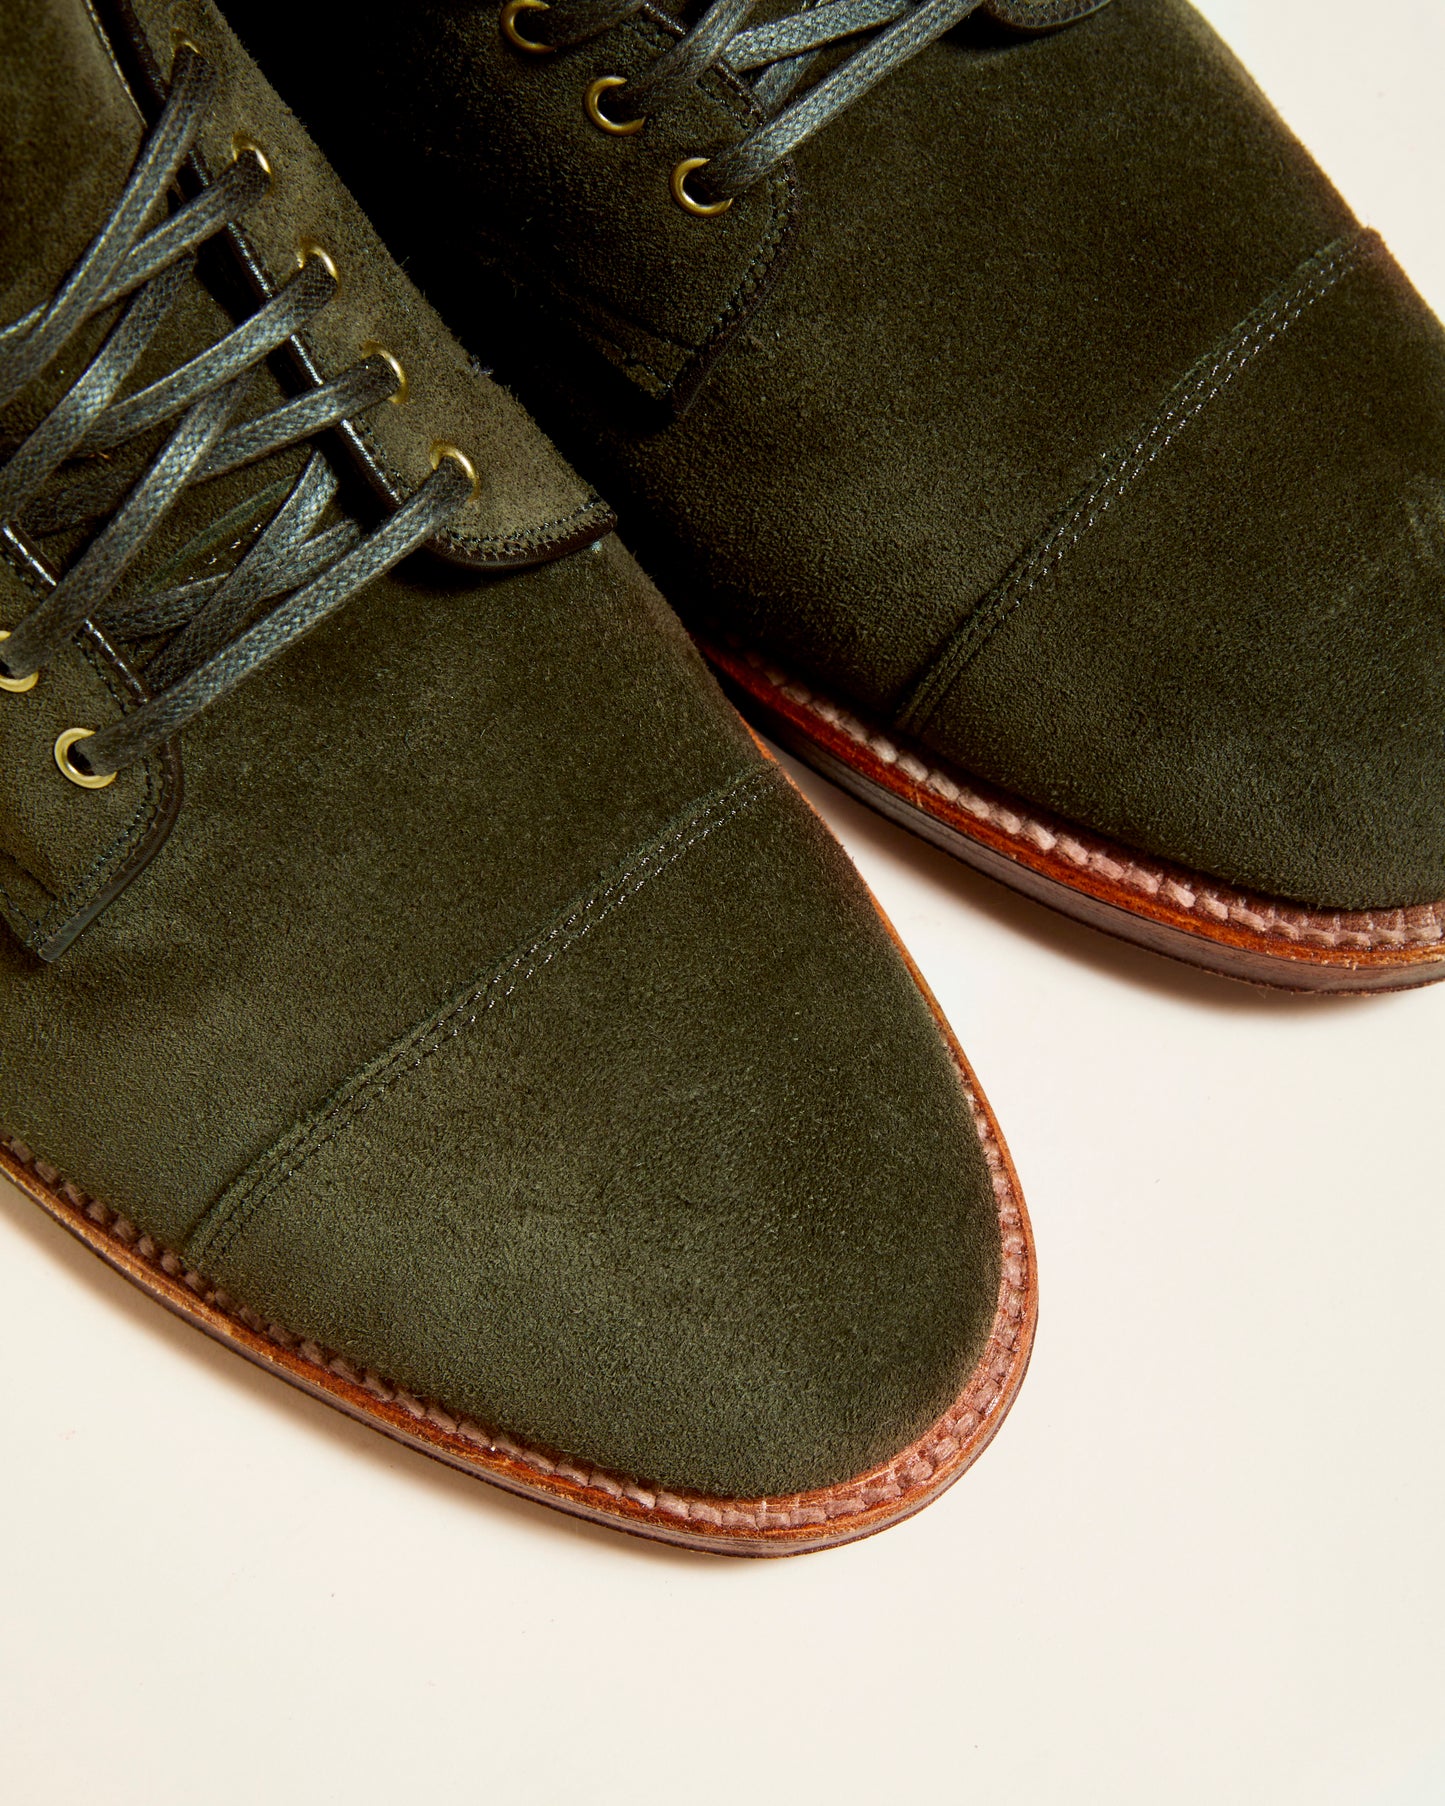 "Marvaments" Straight Tip Boot in Loden Green Suede, Grant Last